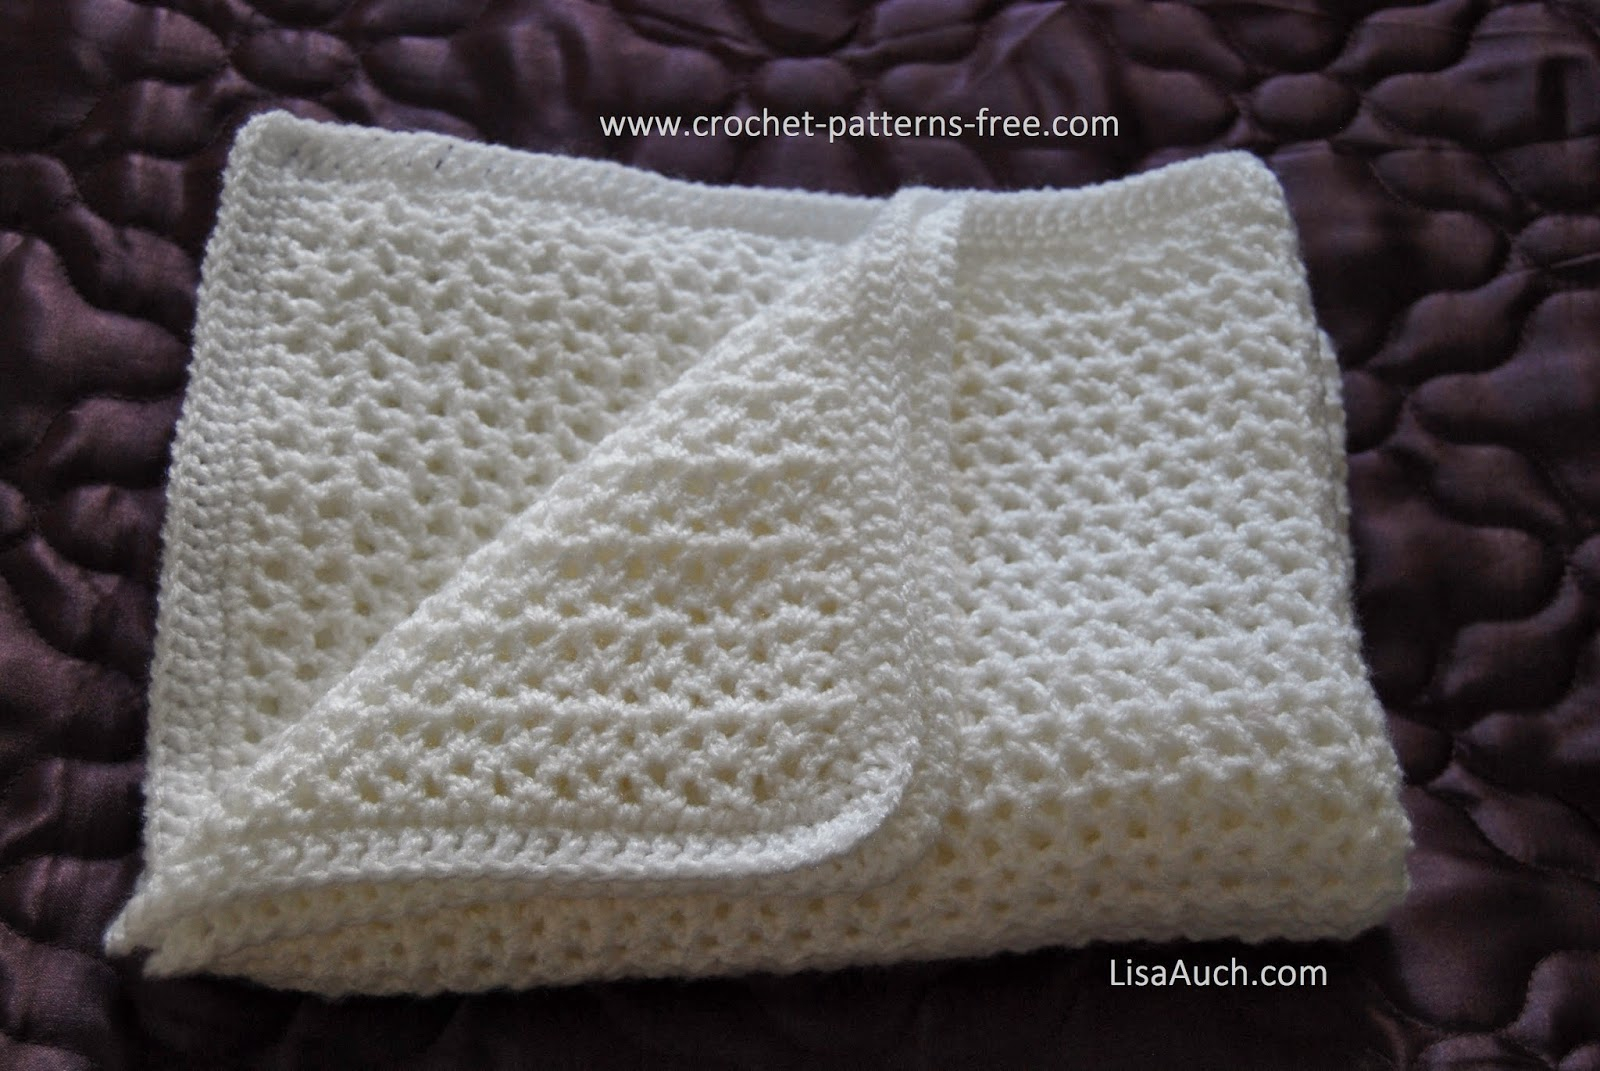 Simple Crochet Blanket Patterns Free Crochet Patterns And Designs Lisaauch Free Crochet Ba